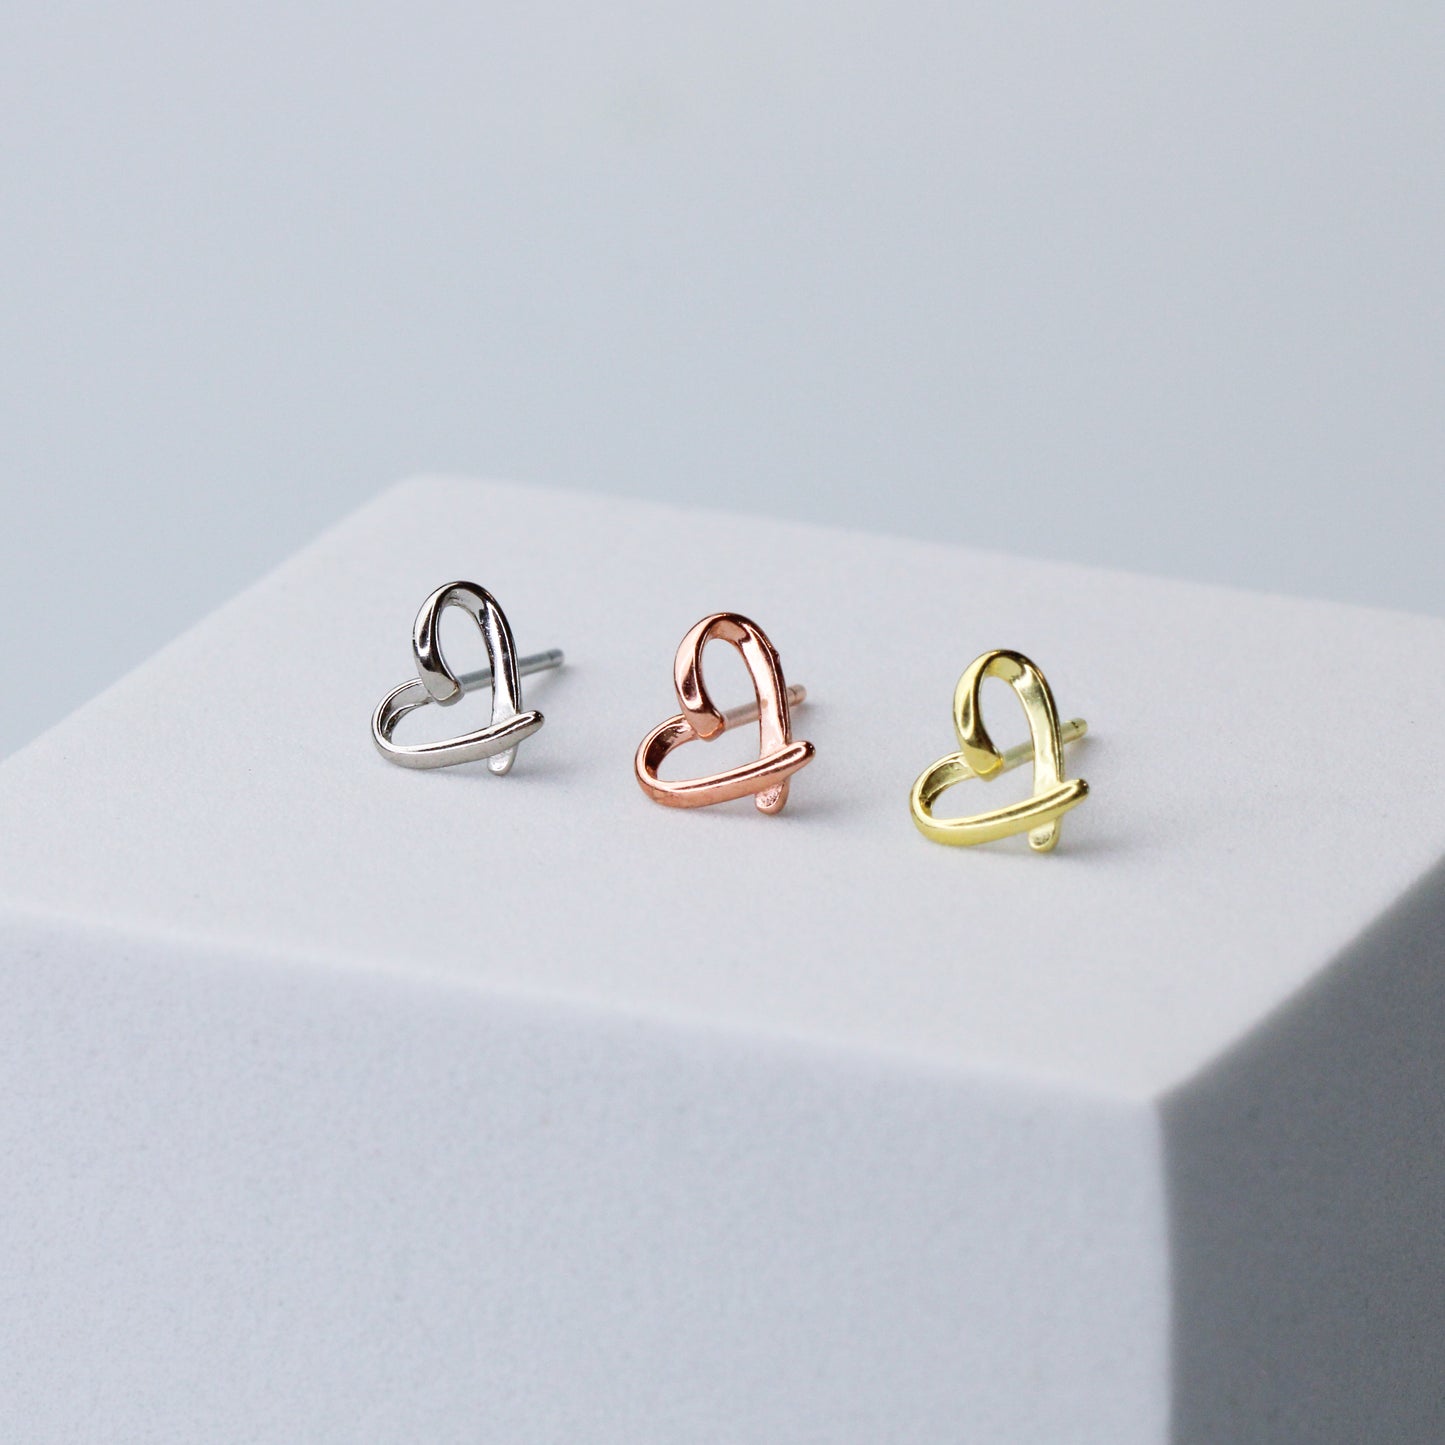 Heart stud earrings in silver, gold and rose gold colour